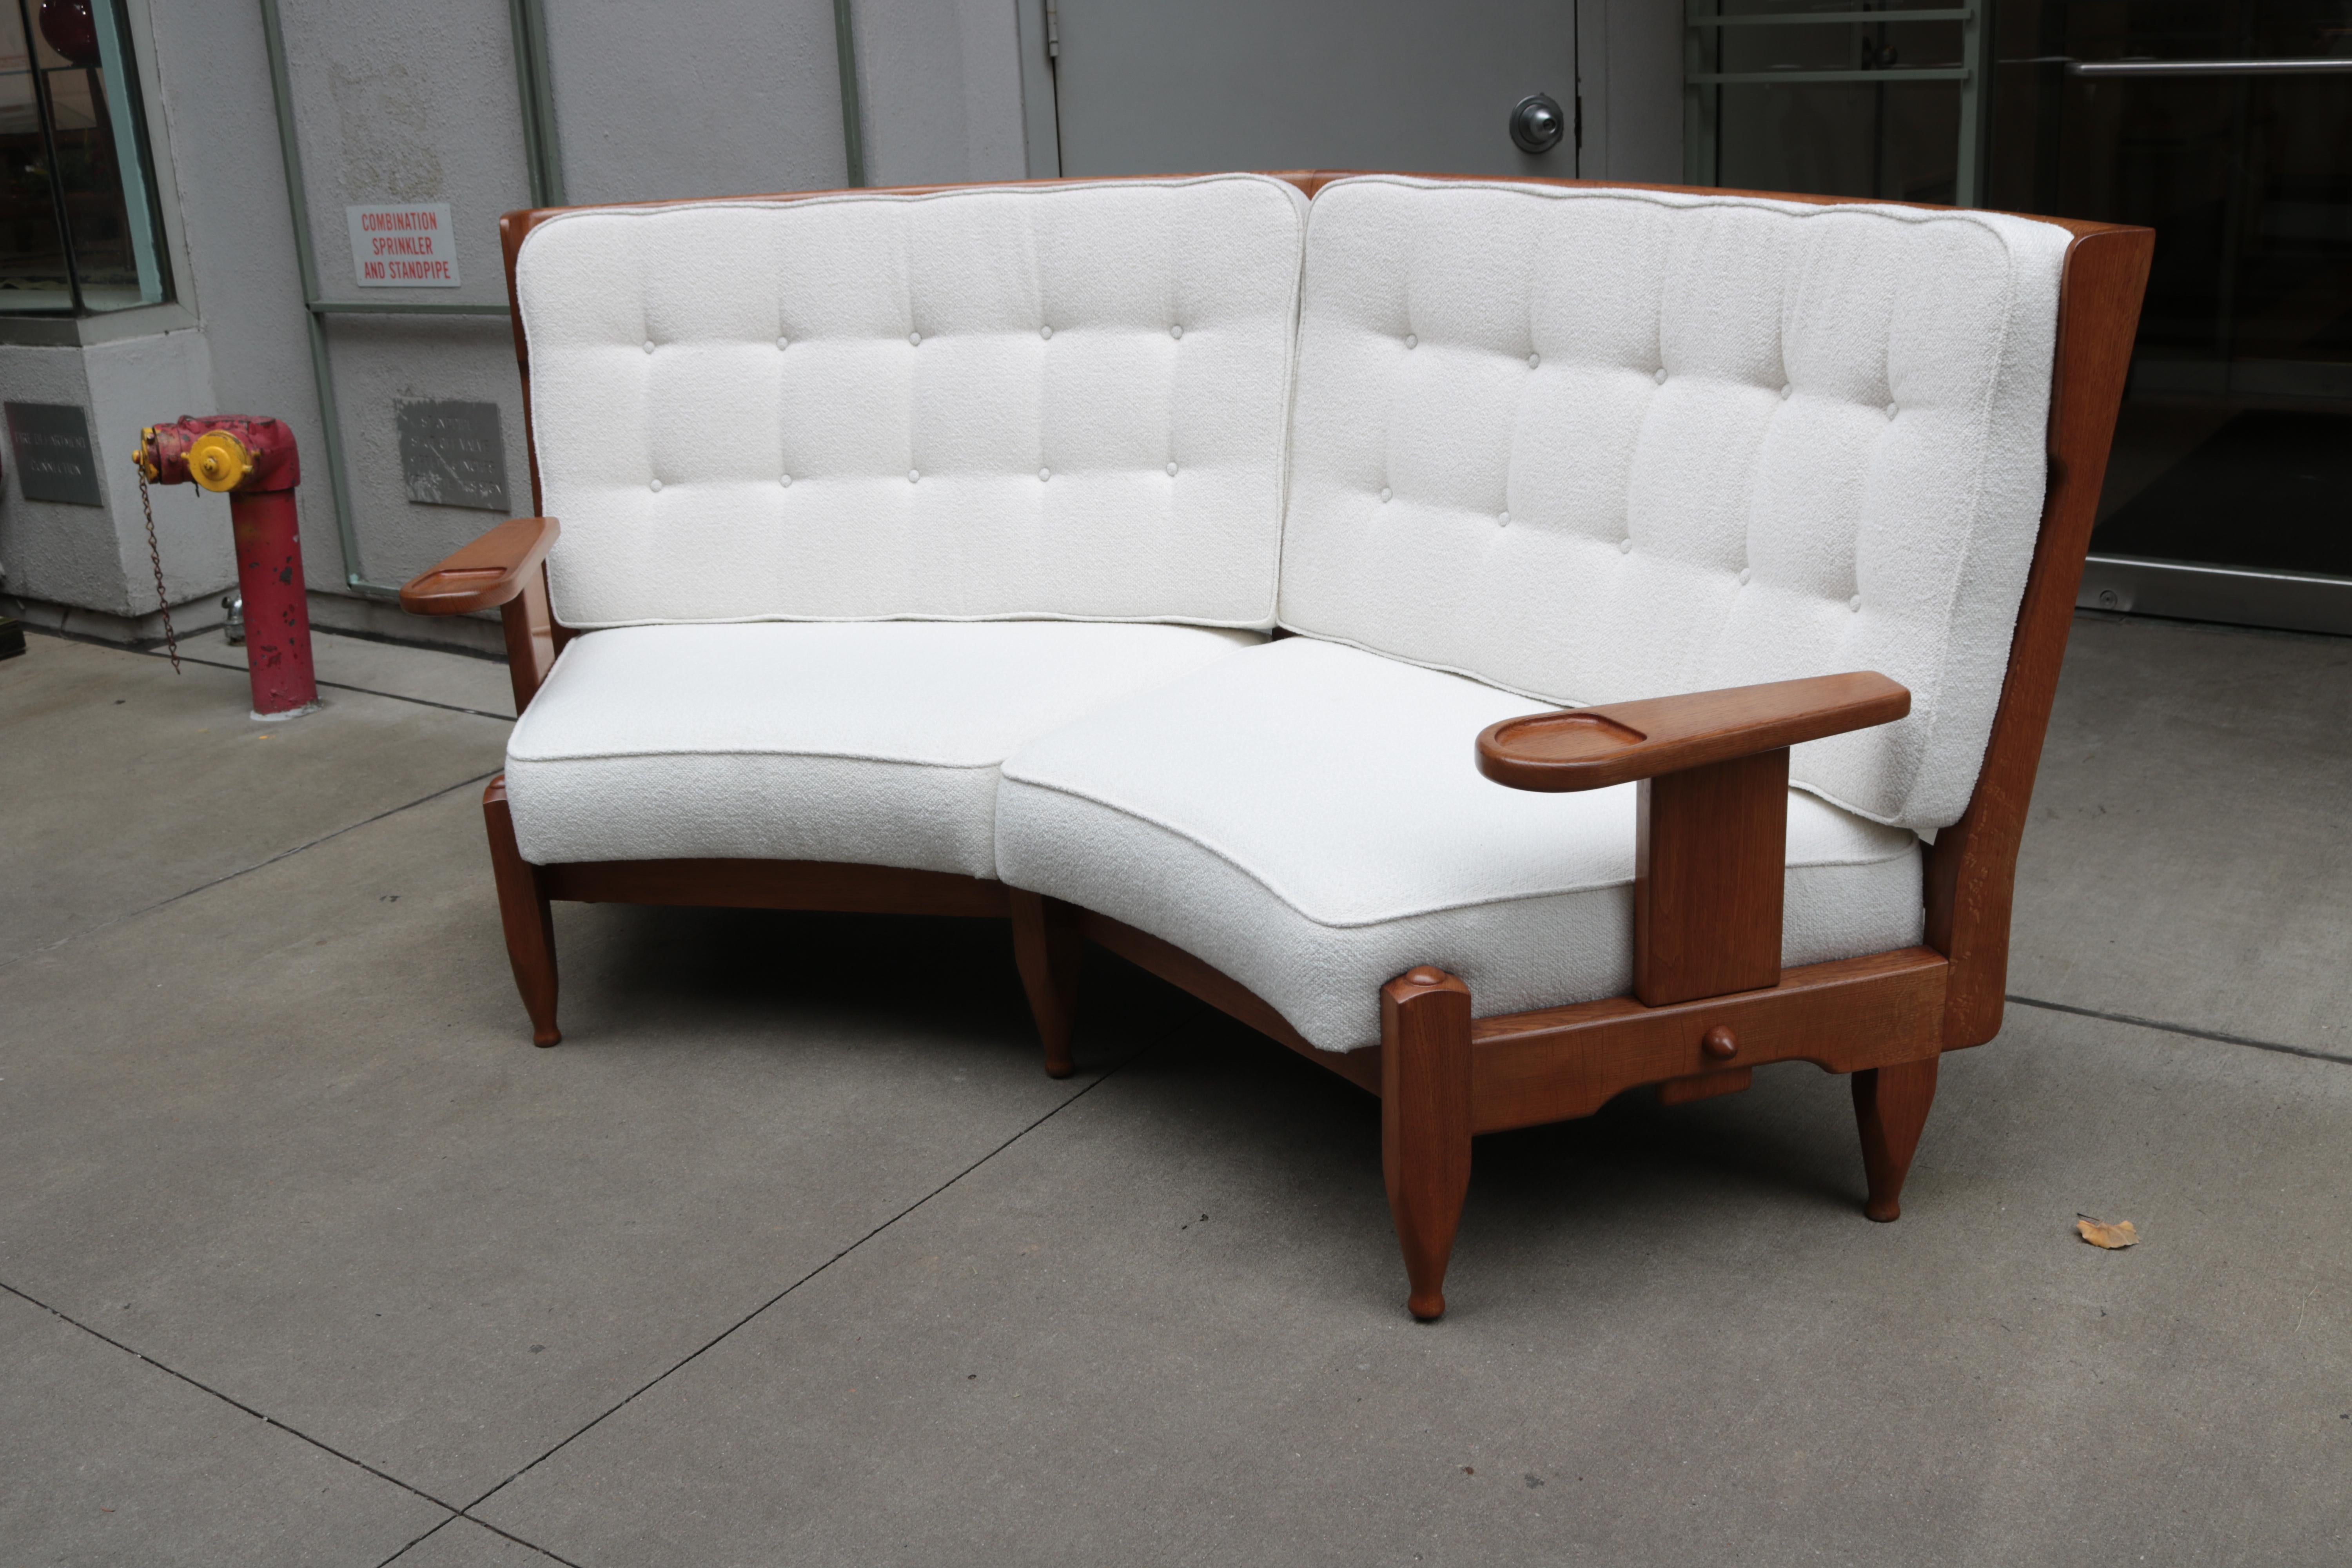 Modernist oak sofa designed by Guillerme et Chambron for the French company 